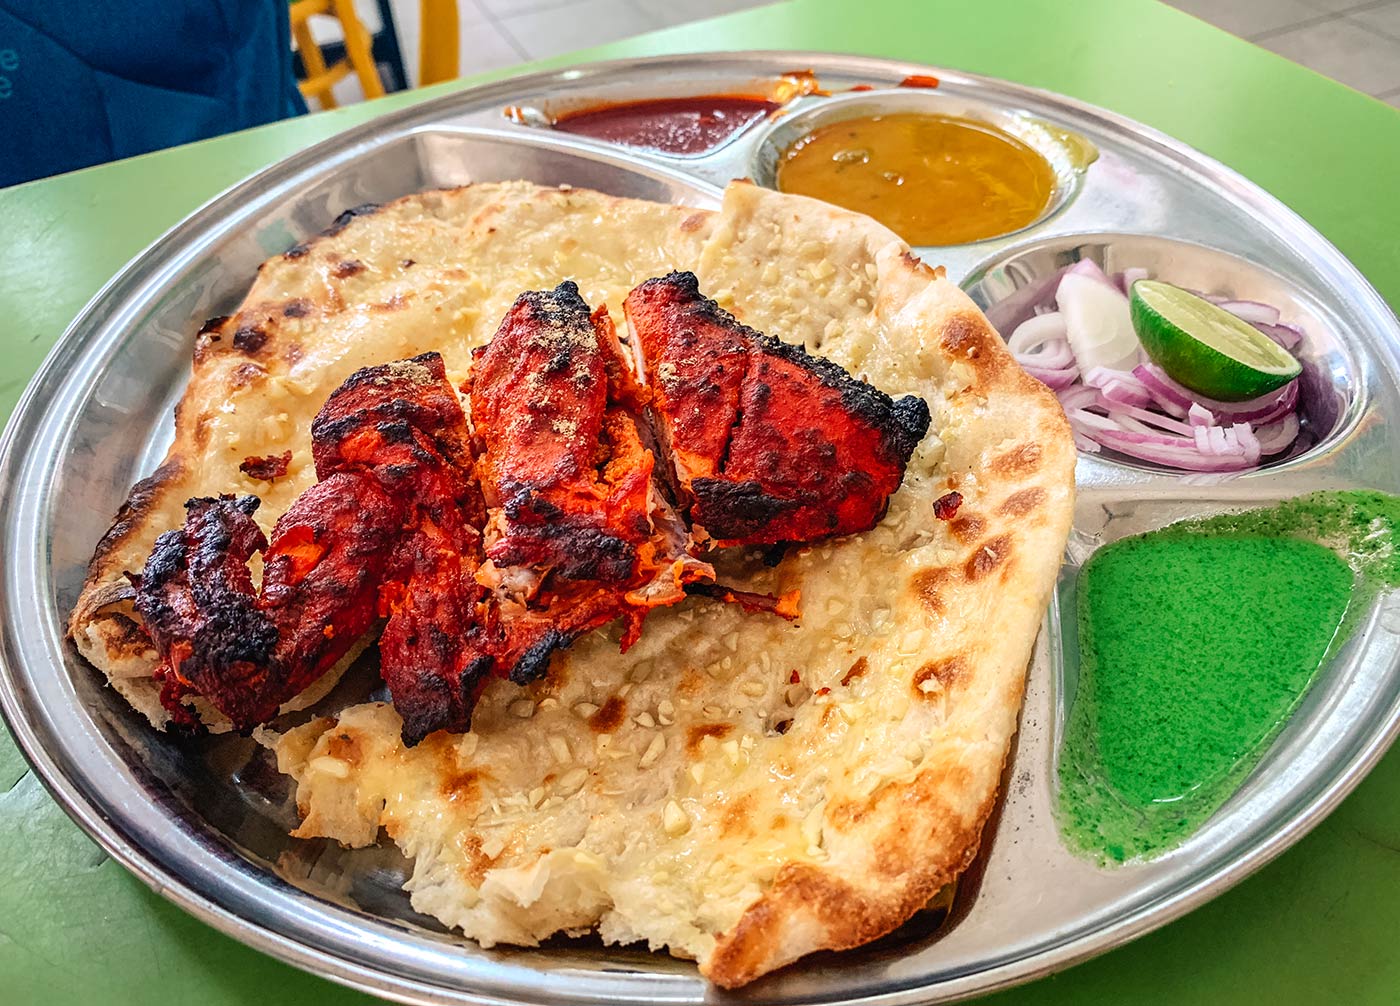 Top foods to try in Georgetown - Penang, Malaysia blog post | Tandoori Chicken and Naan